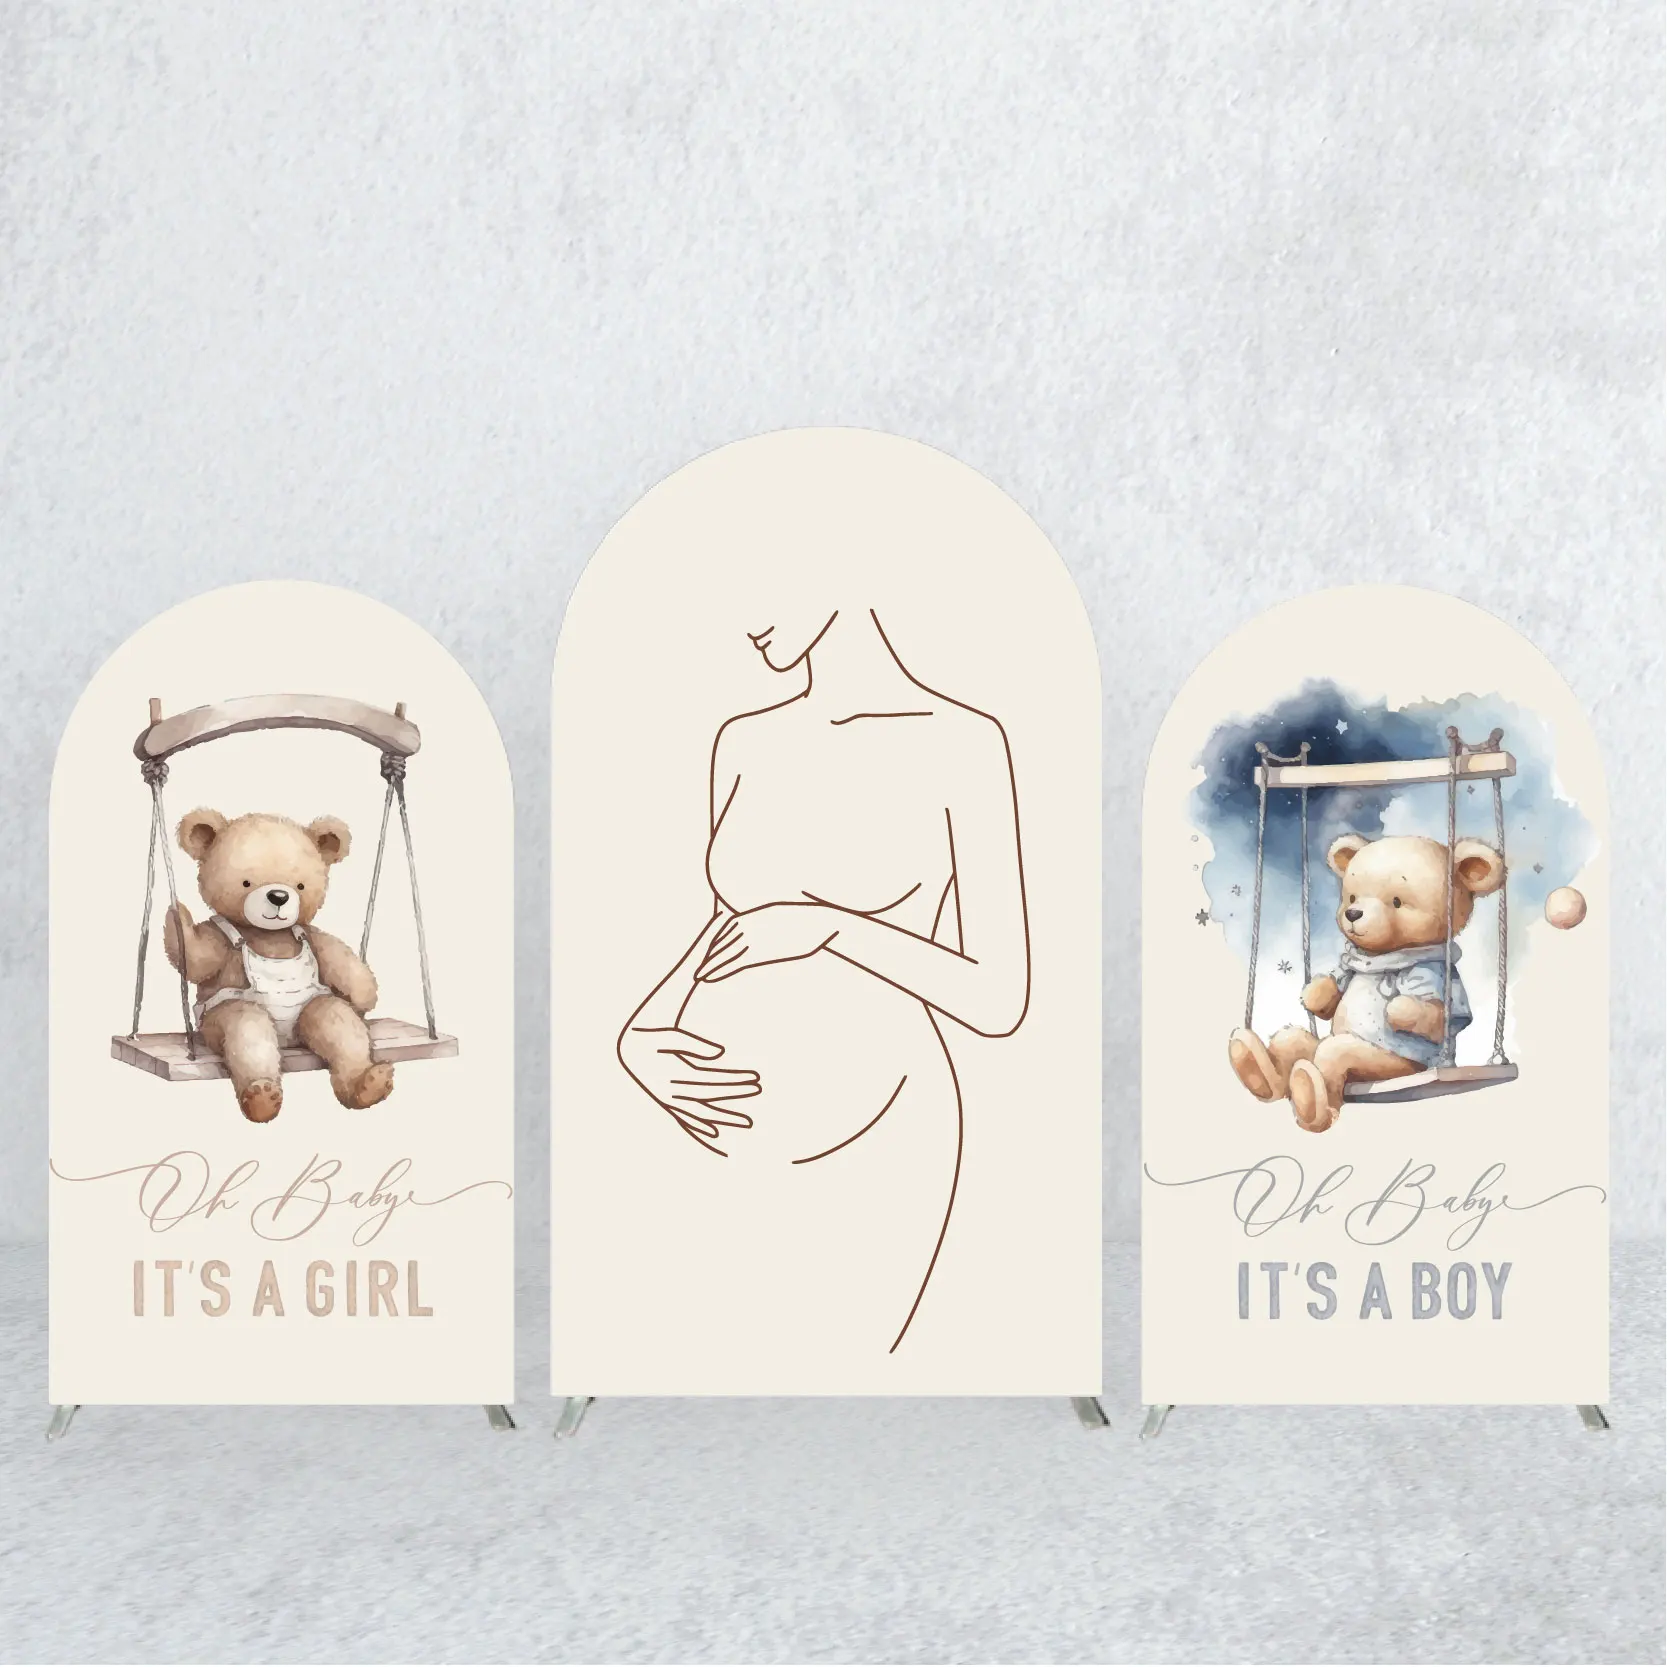 

Baby Bear Arch Backdrop Covers, Baby Shower / Gender Reveal Decoration,pregnant Woman Design Arched Cover Bottom with Zipper